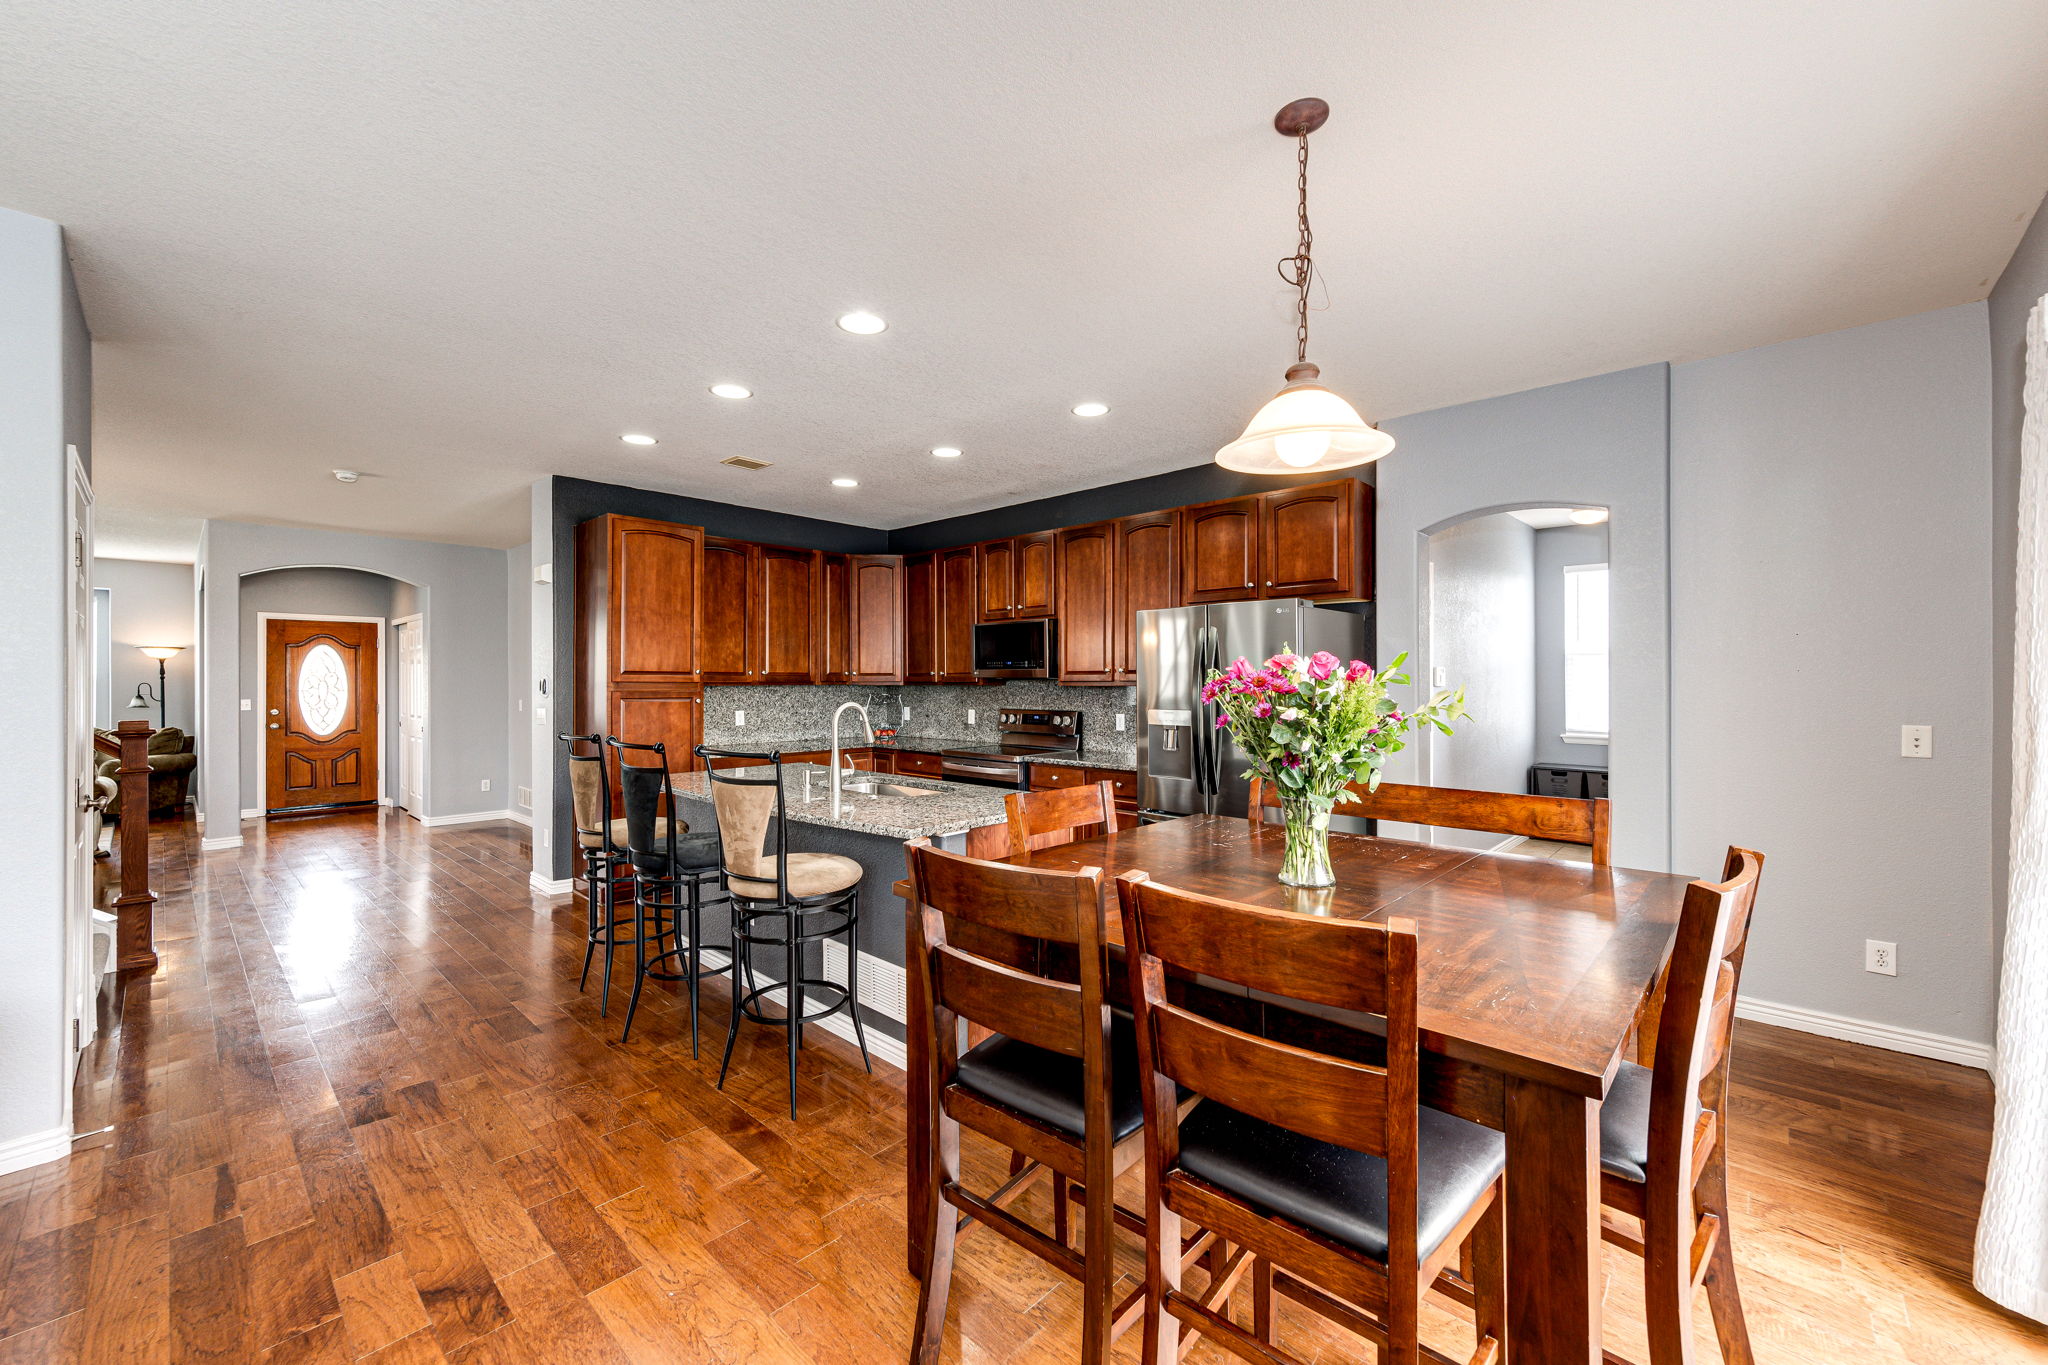 Bright & open floor plan!  Eat-in space off of the kitchen.